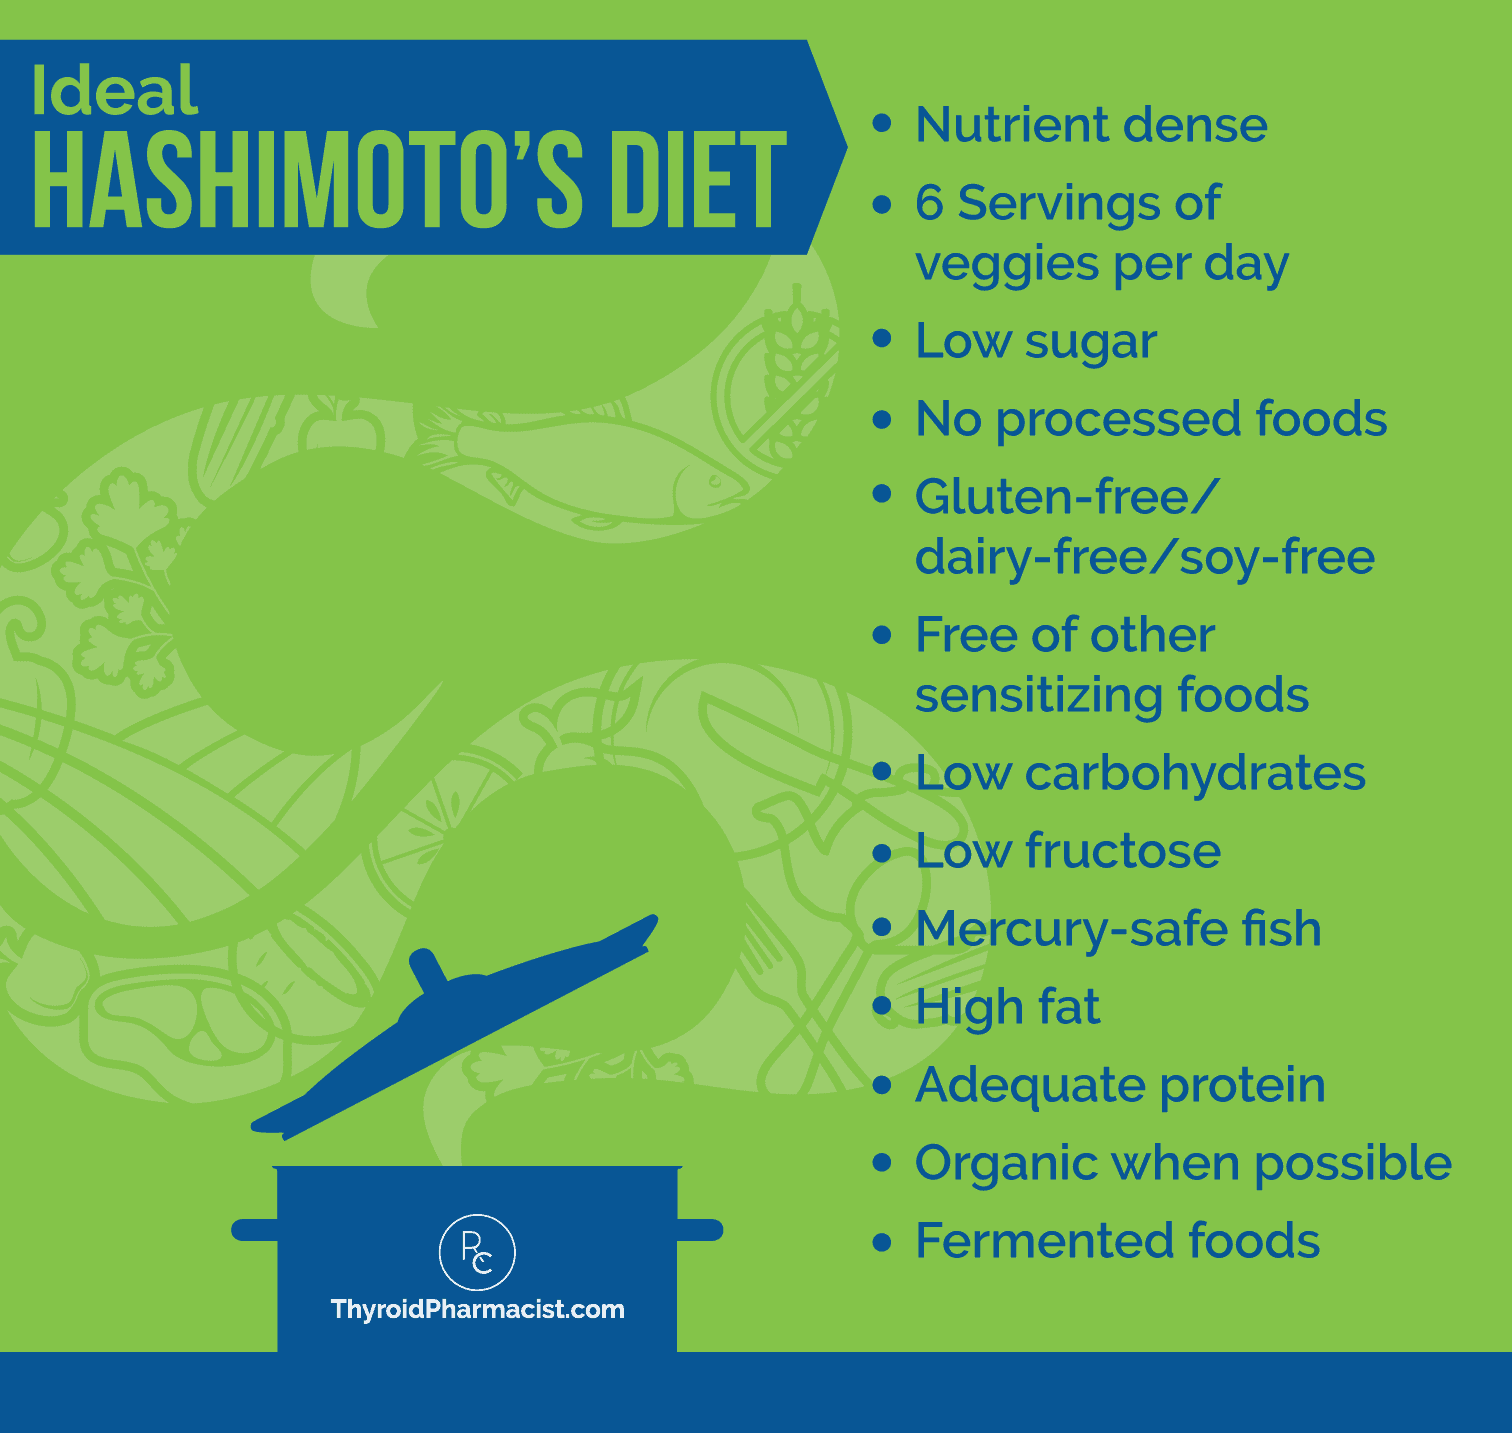 Ideal Hashimoto's Diet Infographic